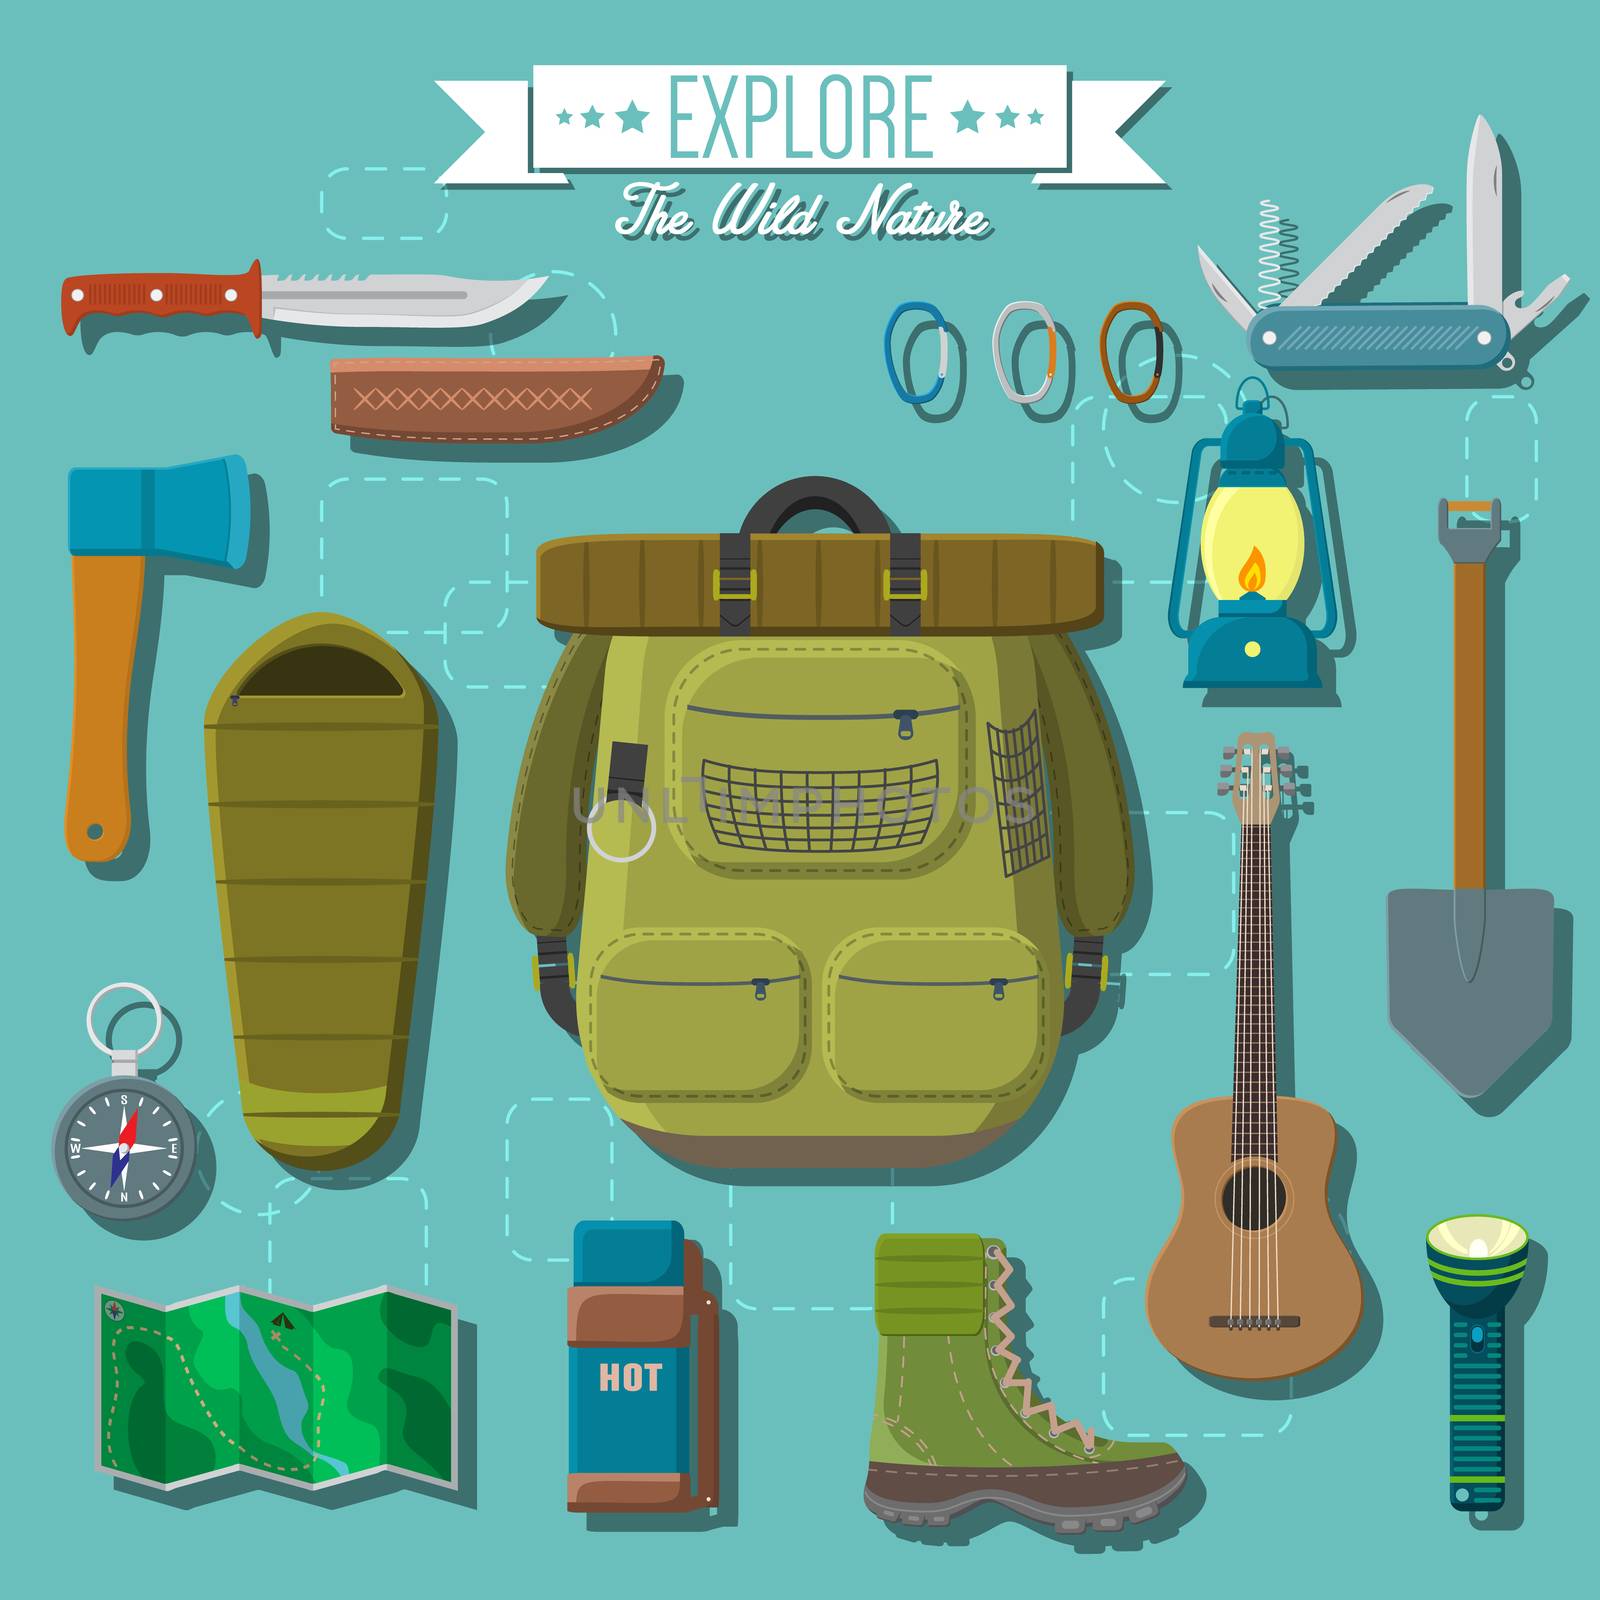 Flat design modern vector illustration of camping and hiking equipment set. Travel and vacation items, knife and axe, backpack and hiking boots, lantern and guitar, sleeping bag, map and compass.